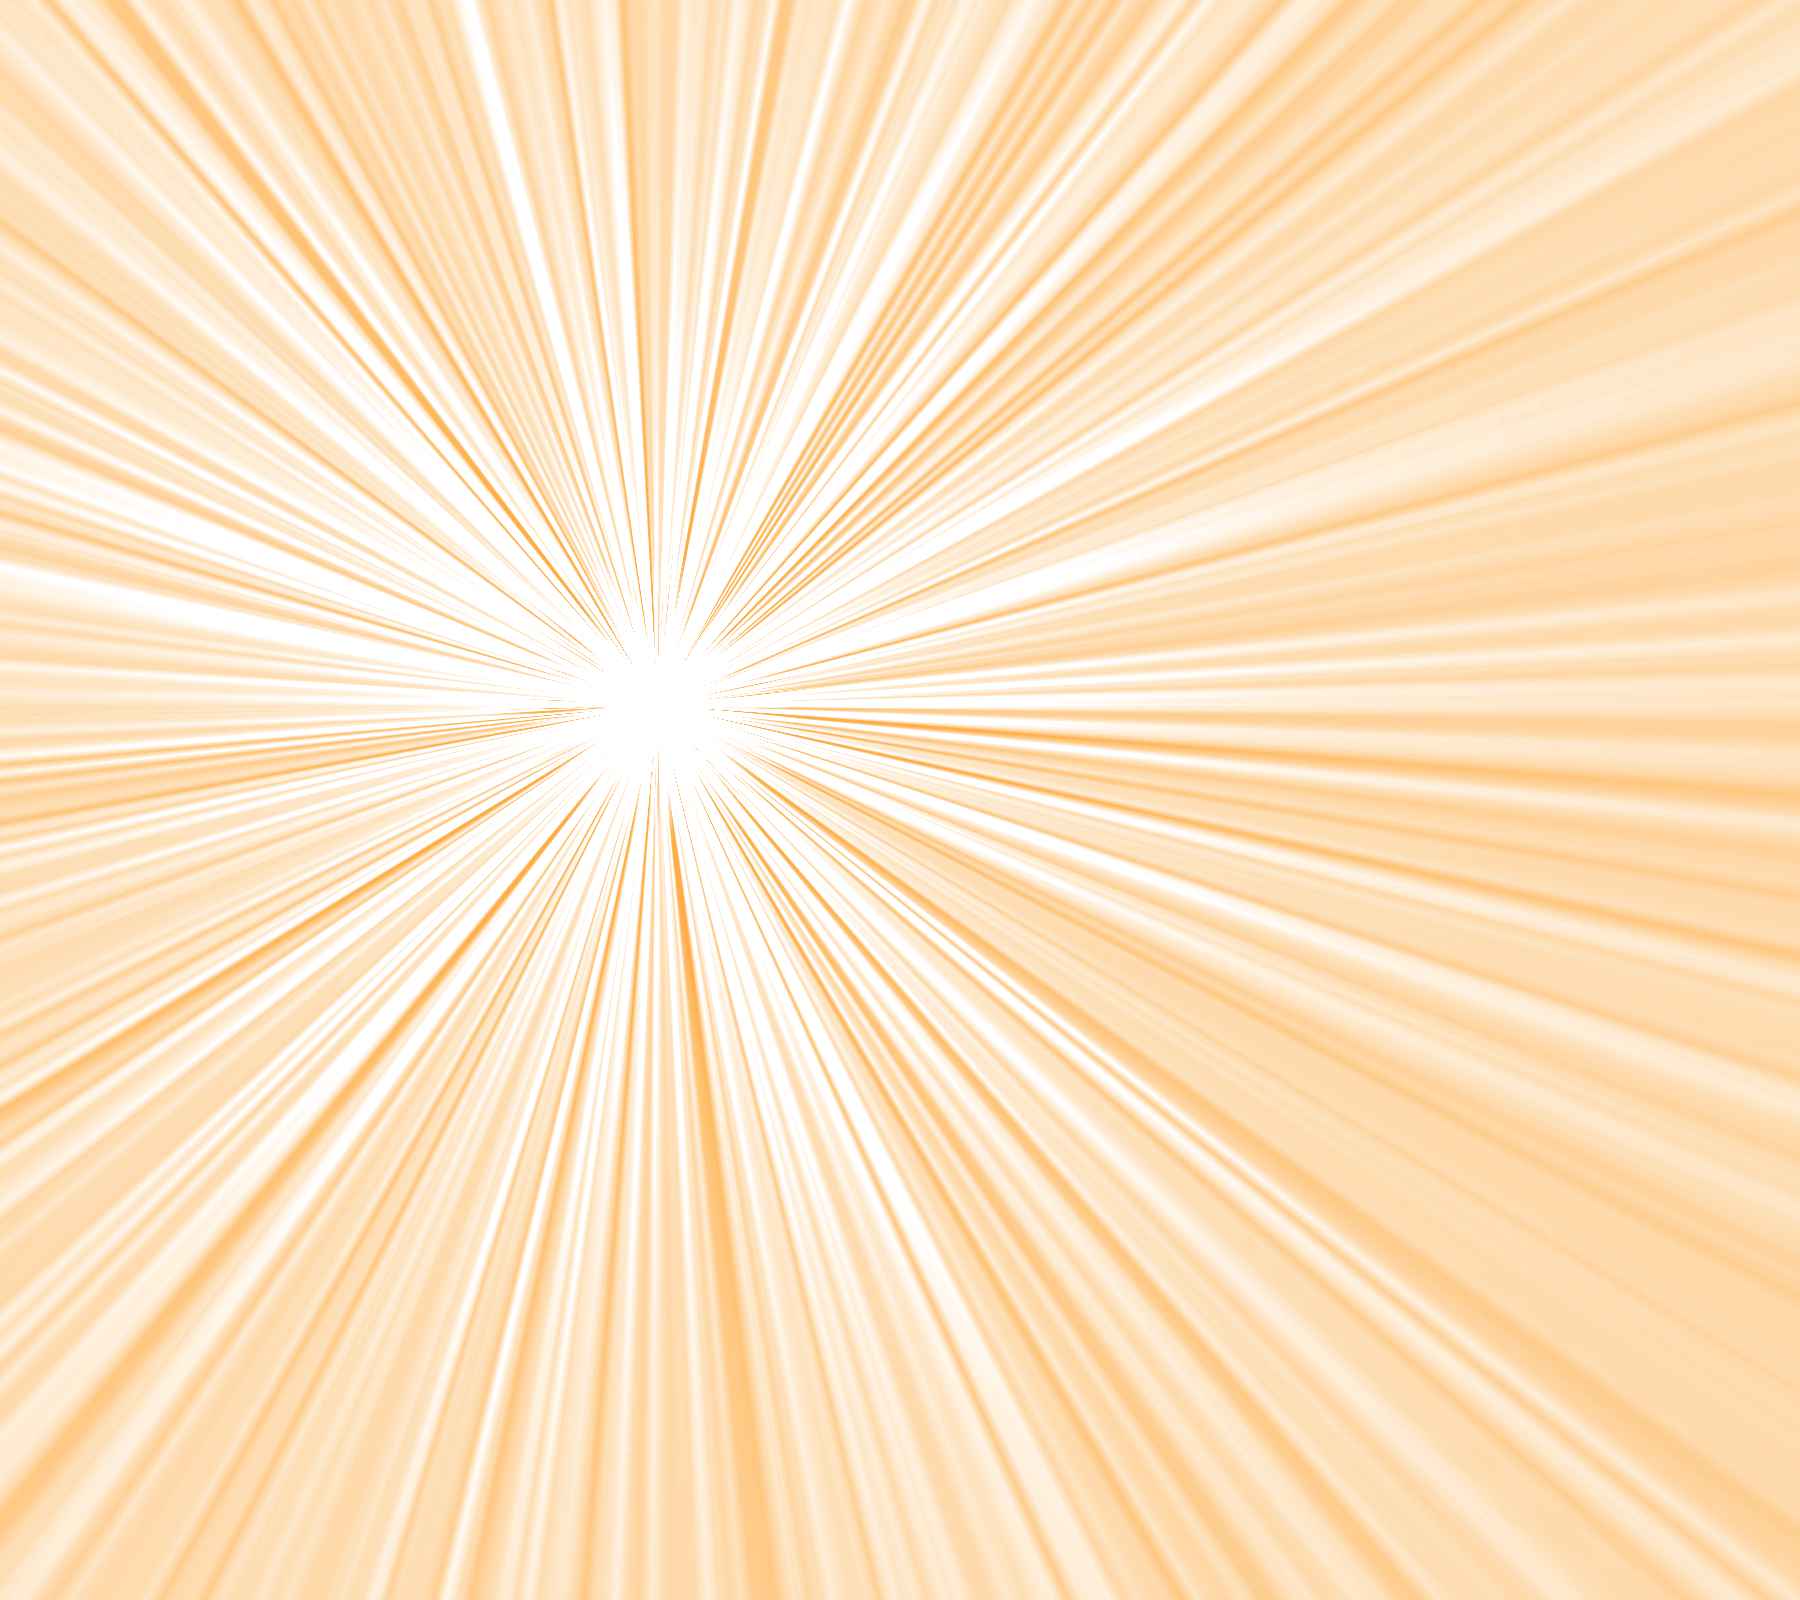 Peach Colored Starburst Radiating Lines Background